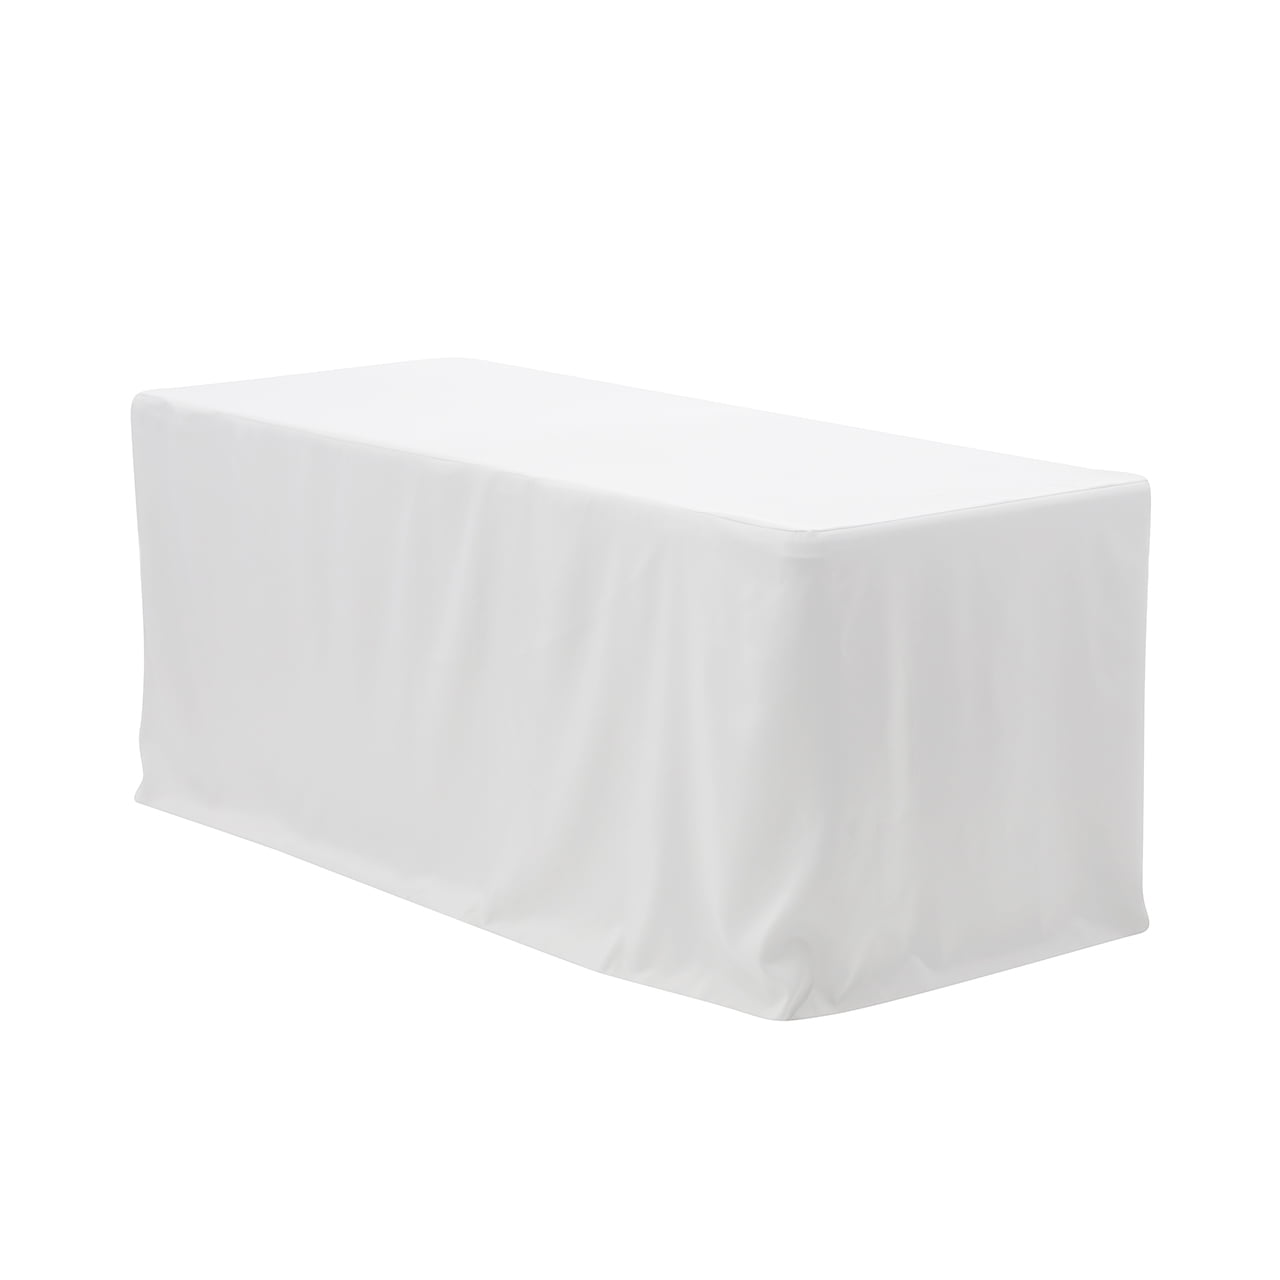 6 Ft Fitted Polyester Tablecloth, How Big Of A Tablecloth For 6ft Table